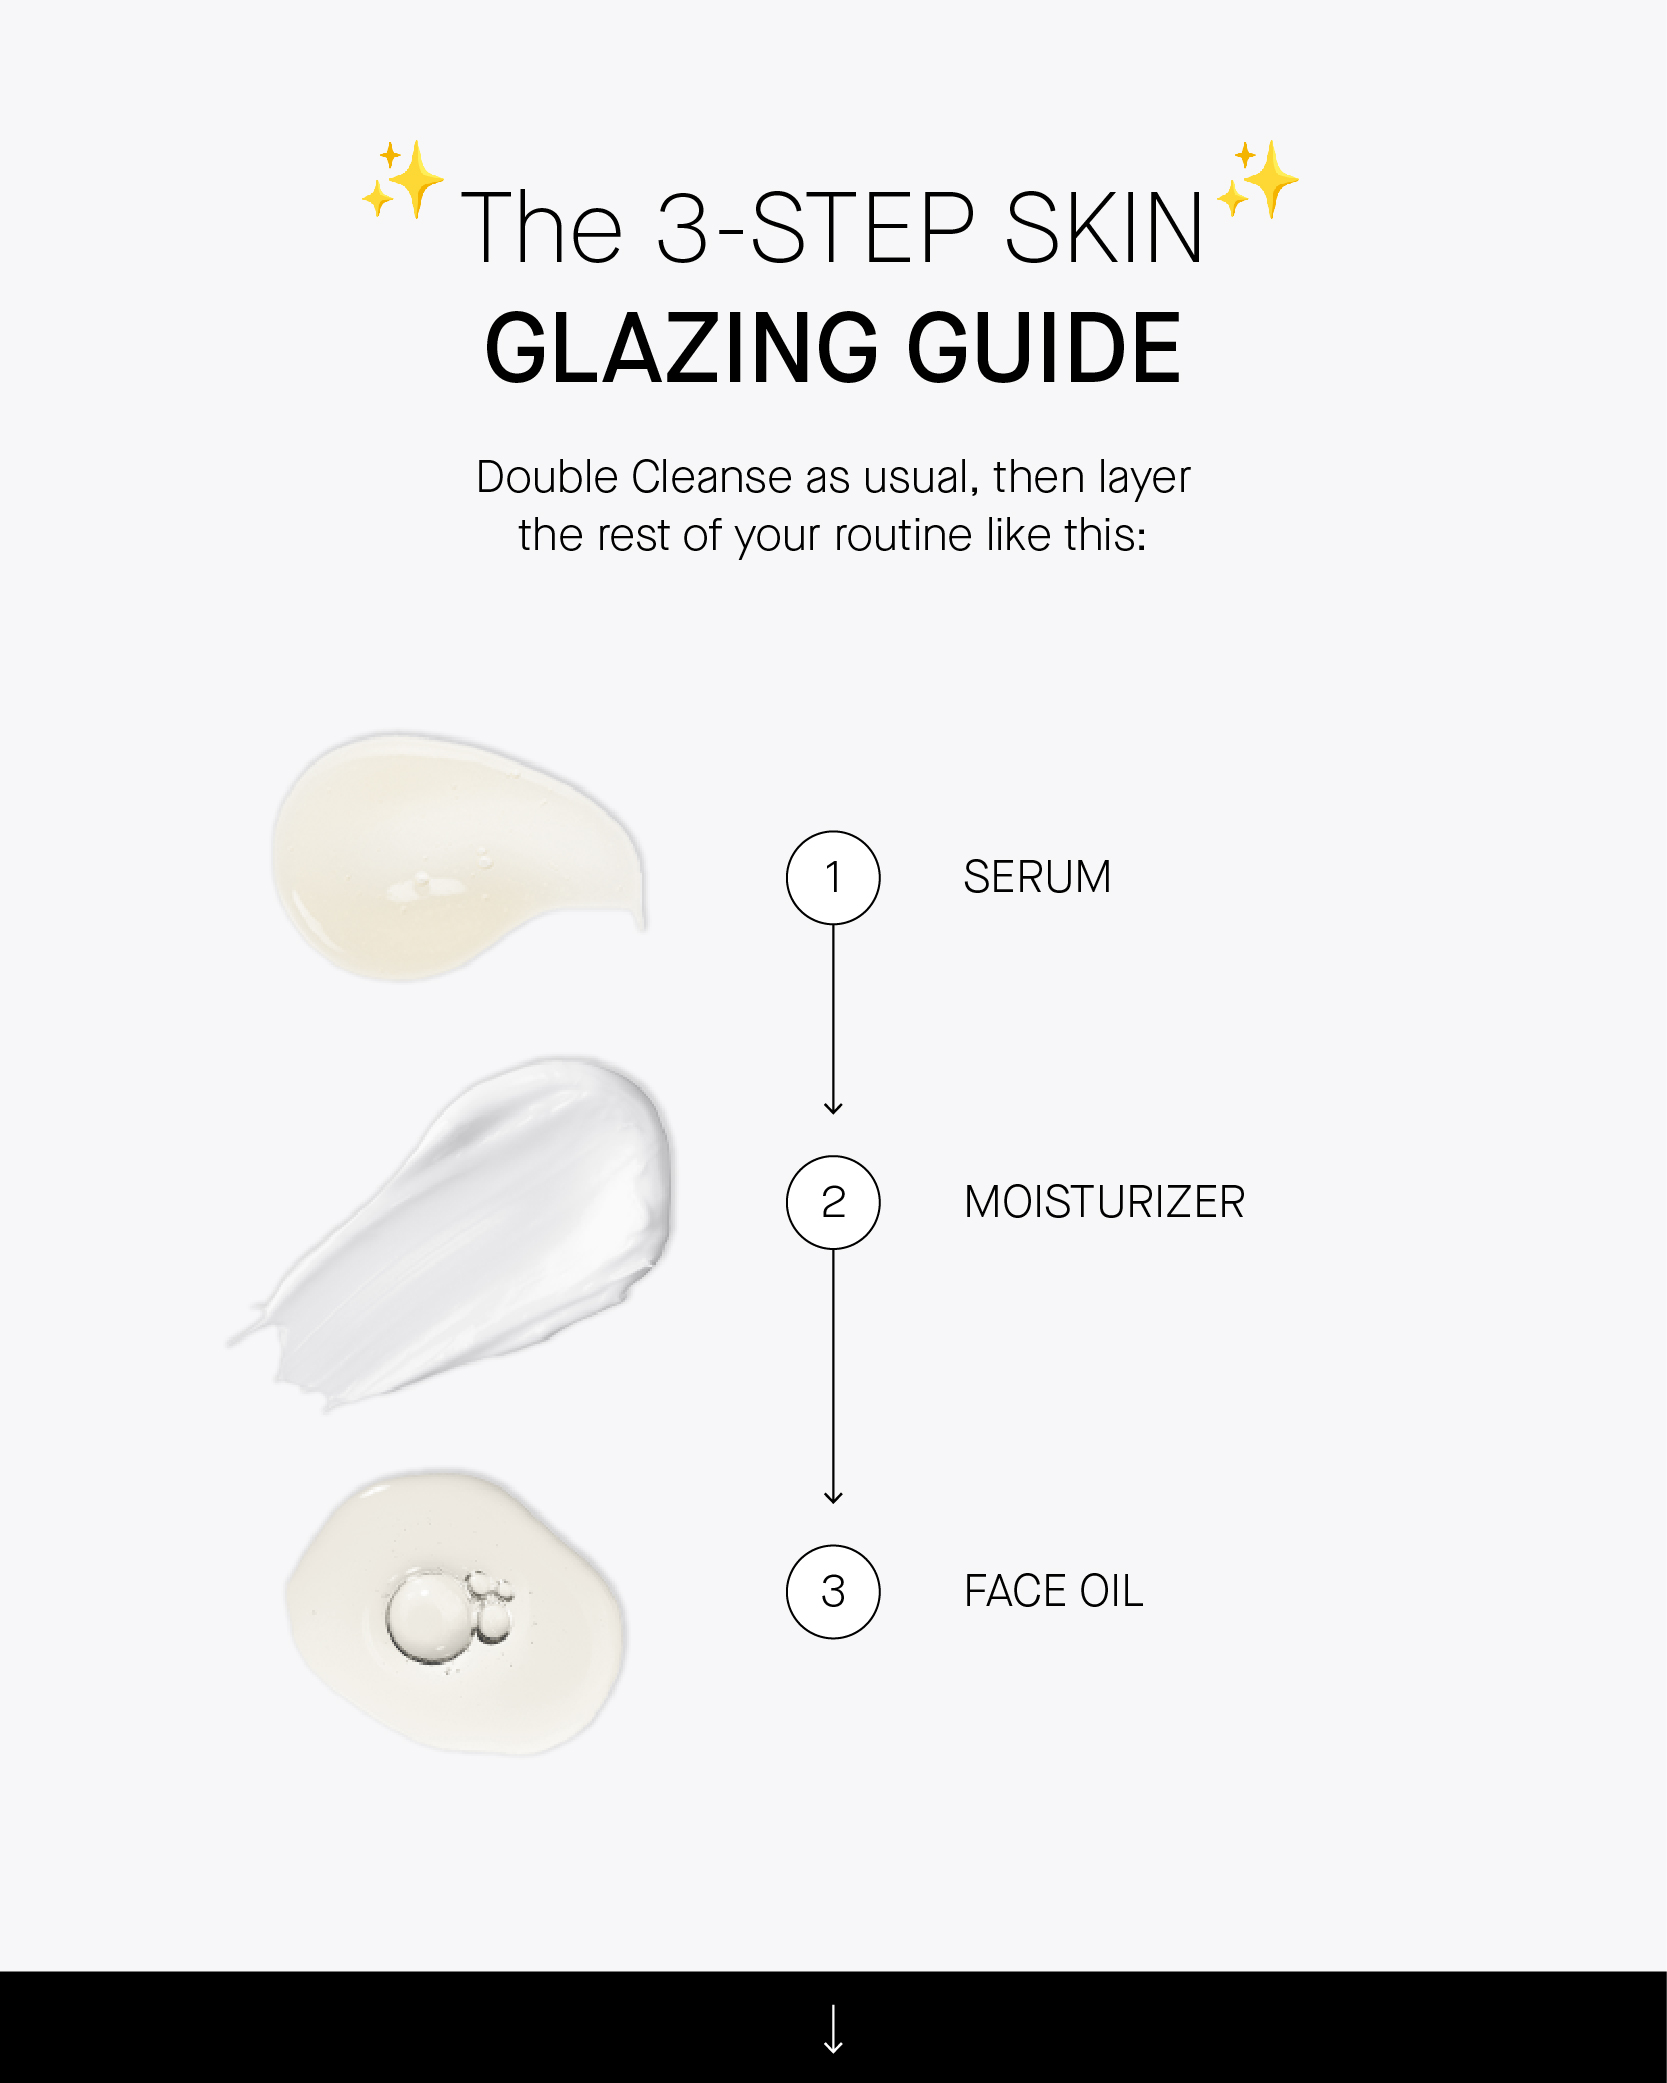 " The 3-ST SKINT GLAZING GUIDE Double Cleanse as usual, then layer the rest of your routine like this: @ SERUM @ MOISTURIZER o @ FACE OIL - 